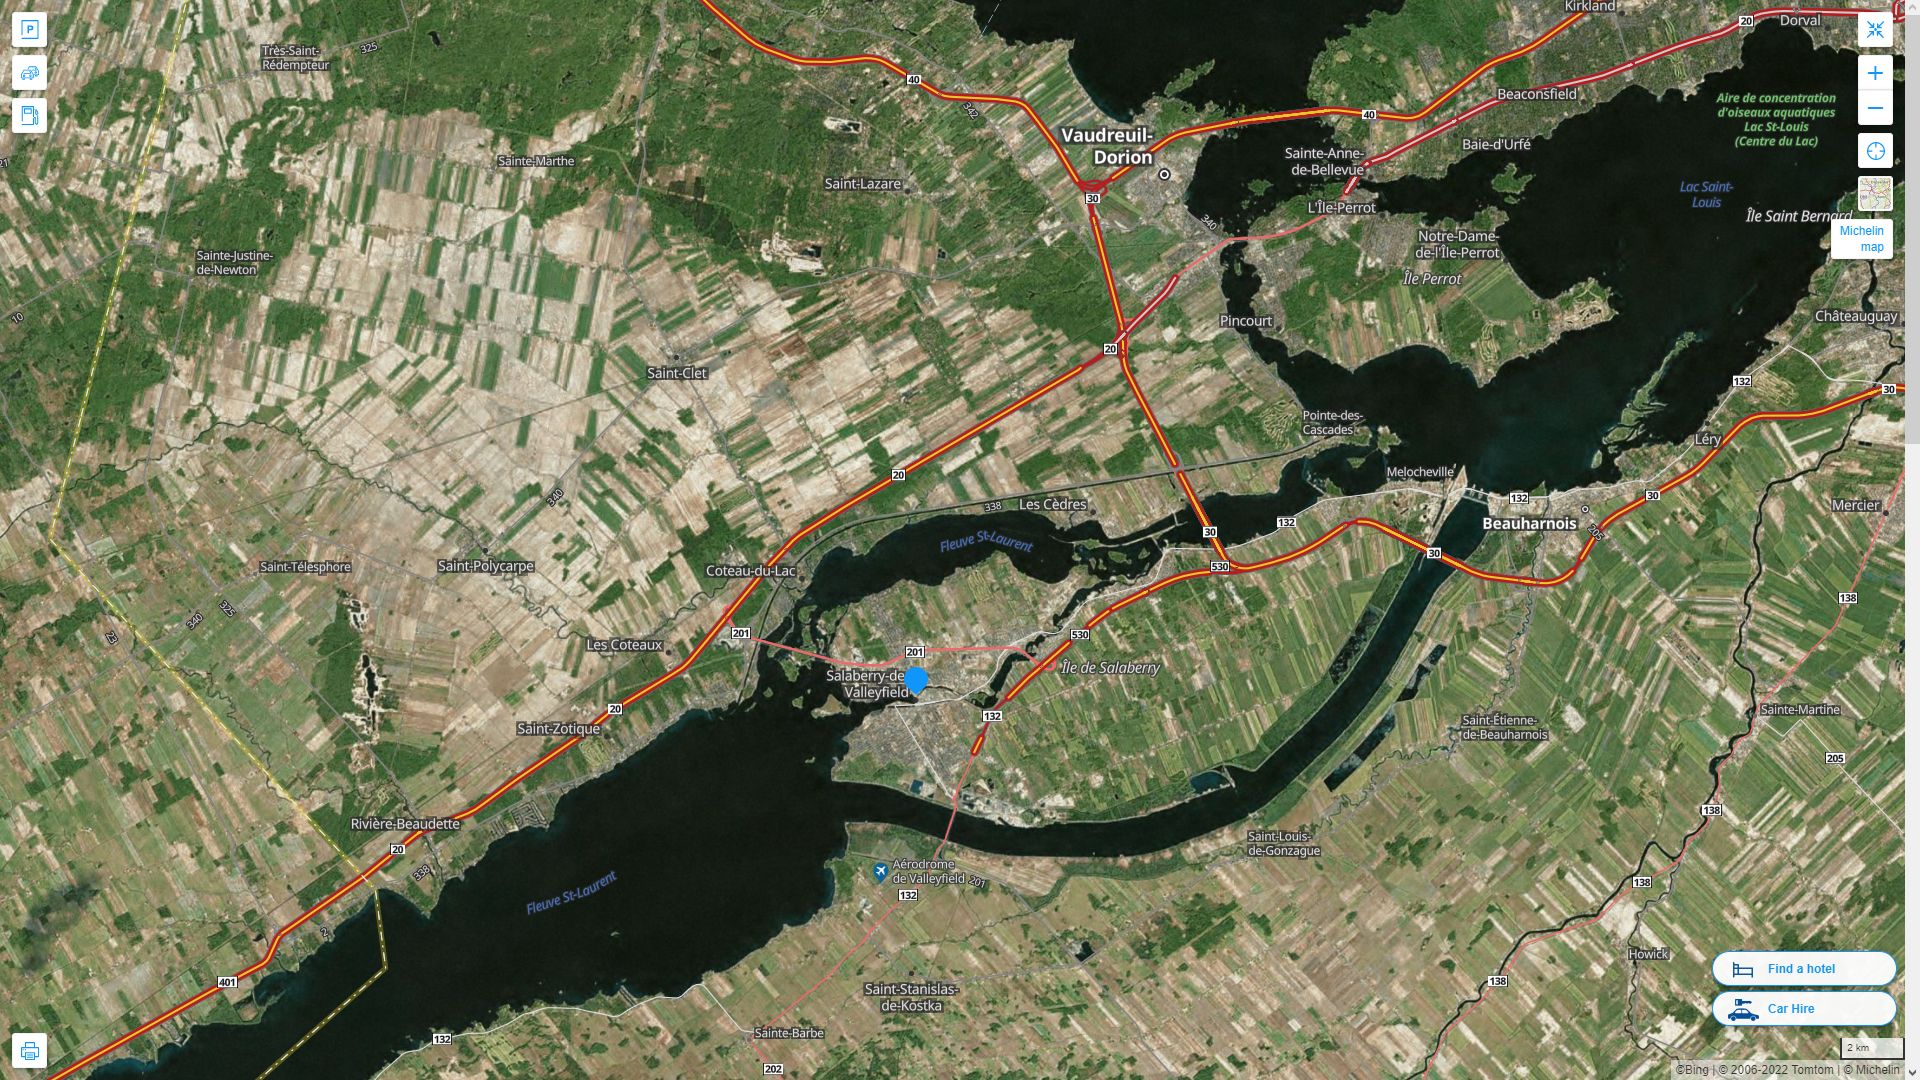 Salaberry de Valleyfield Highway and Road Map with Satellite View